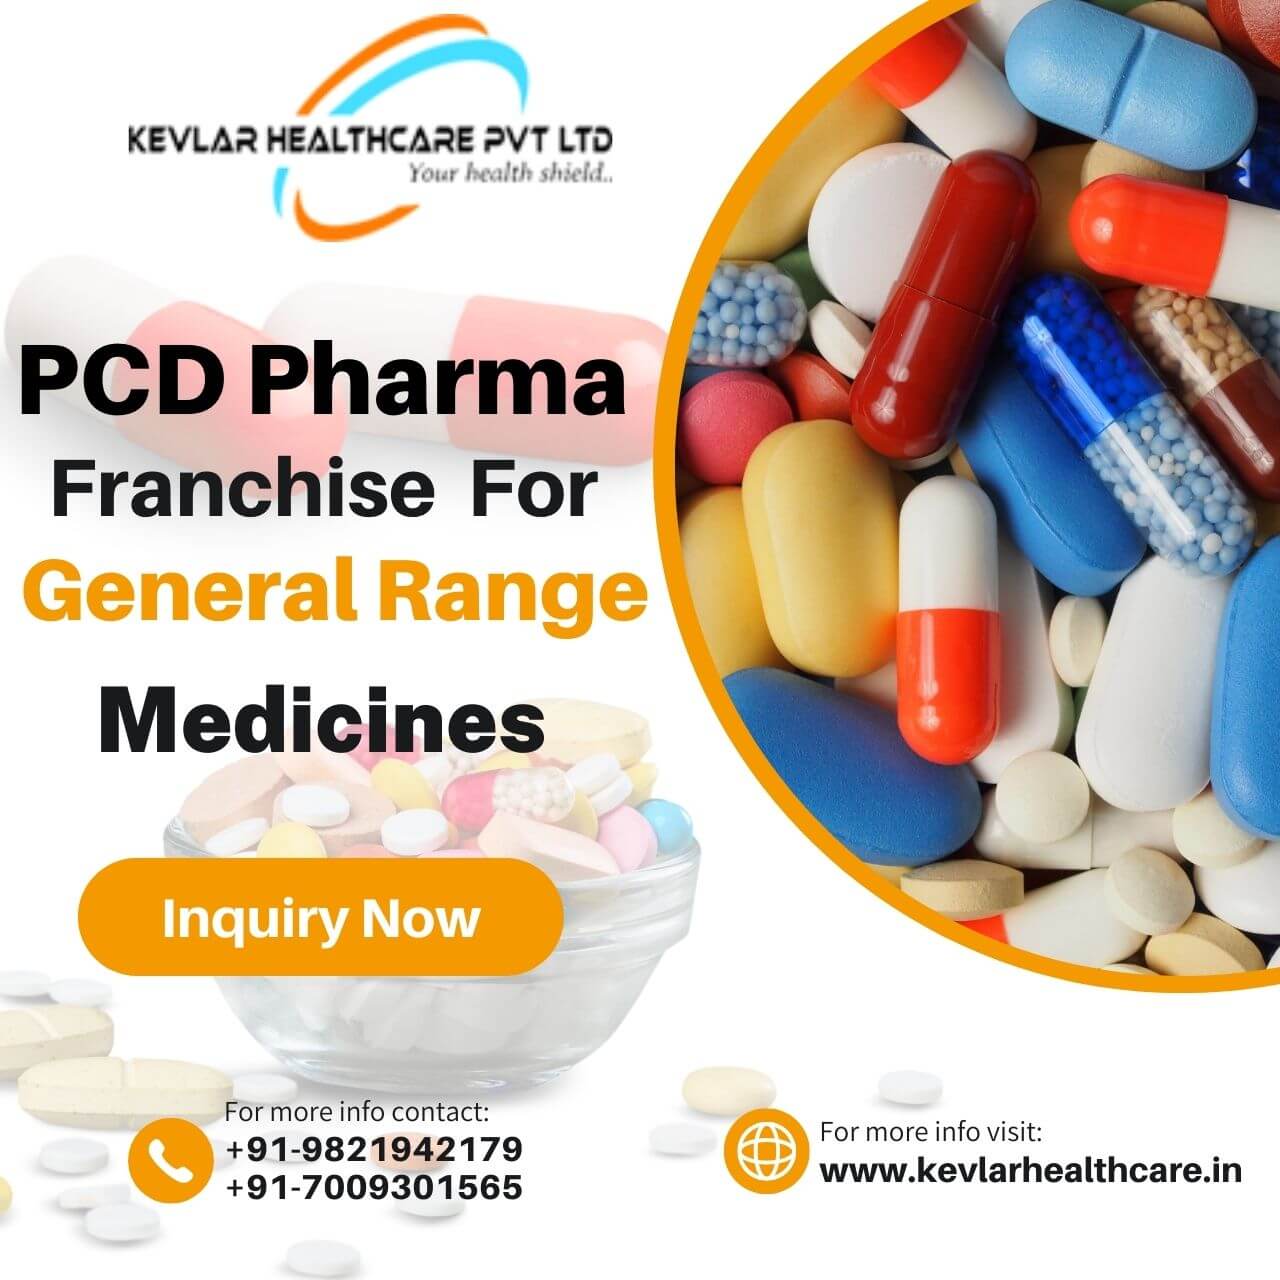 General Range PCD Company | PCD Pharma in General Products